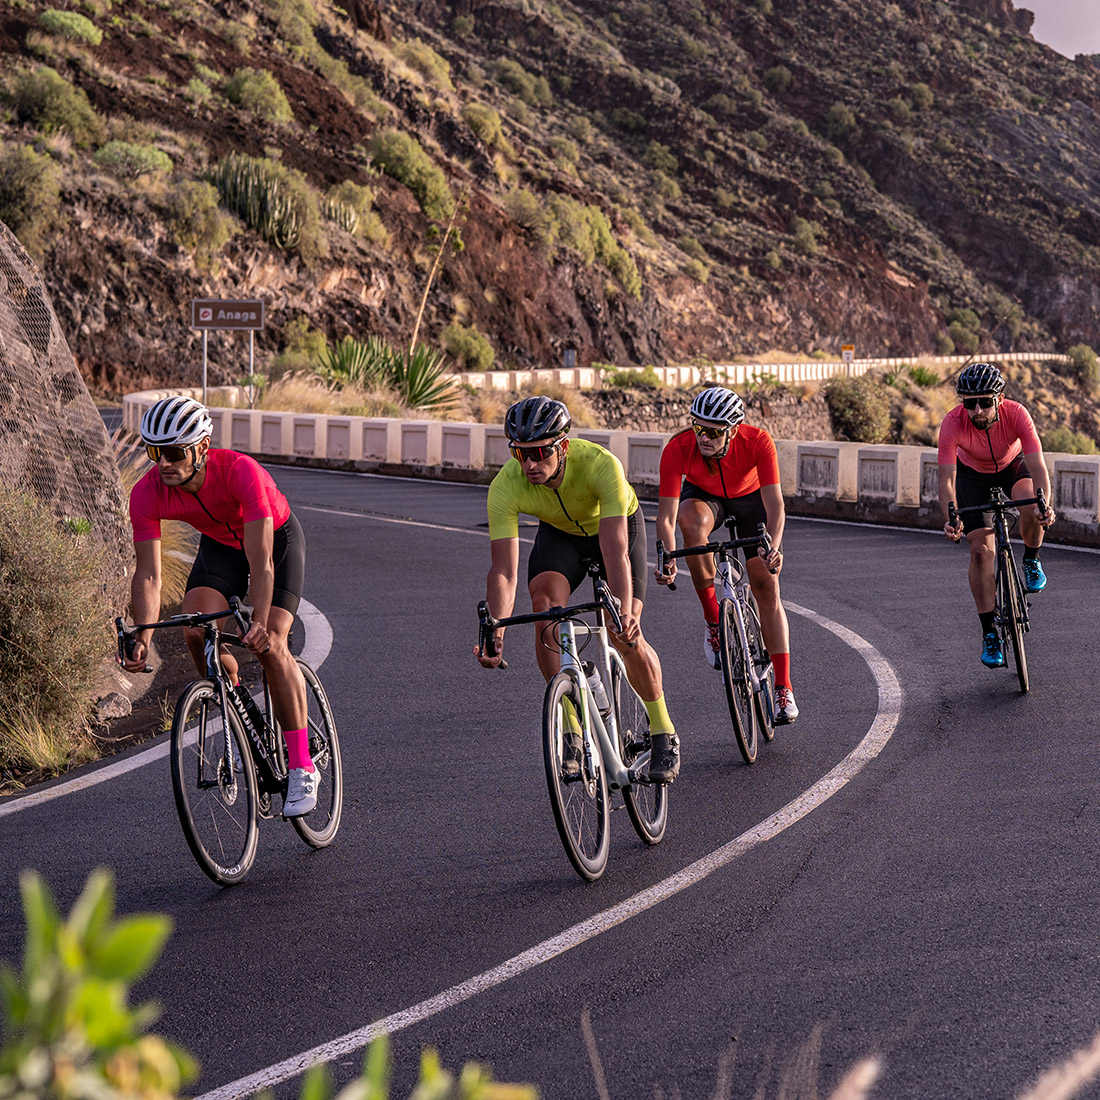 Roads in Anaga Park on Tenerife and cyclists riding